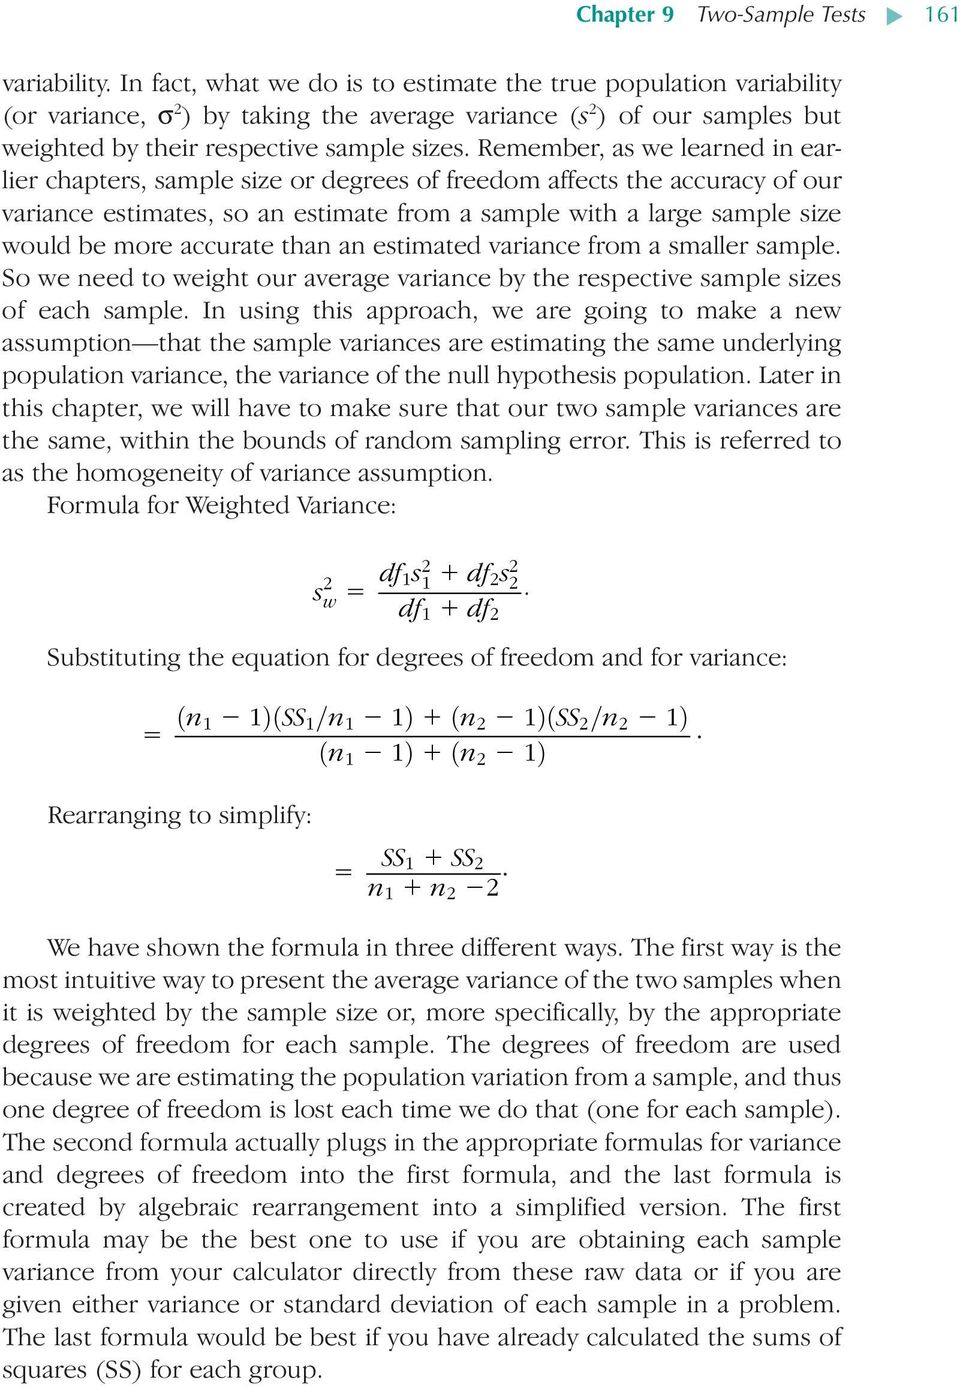 Remember, as we learned in earlier chapters, sample size or degrees of freedom affects the accuracy of our variance estimates, so an estimate from a sample with a large sample size would be more